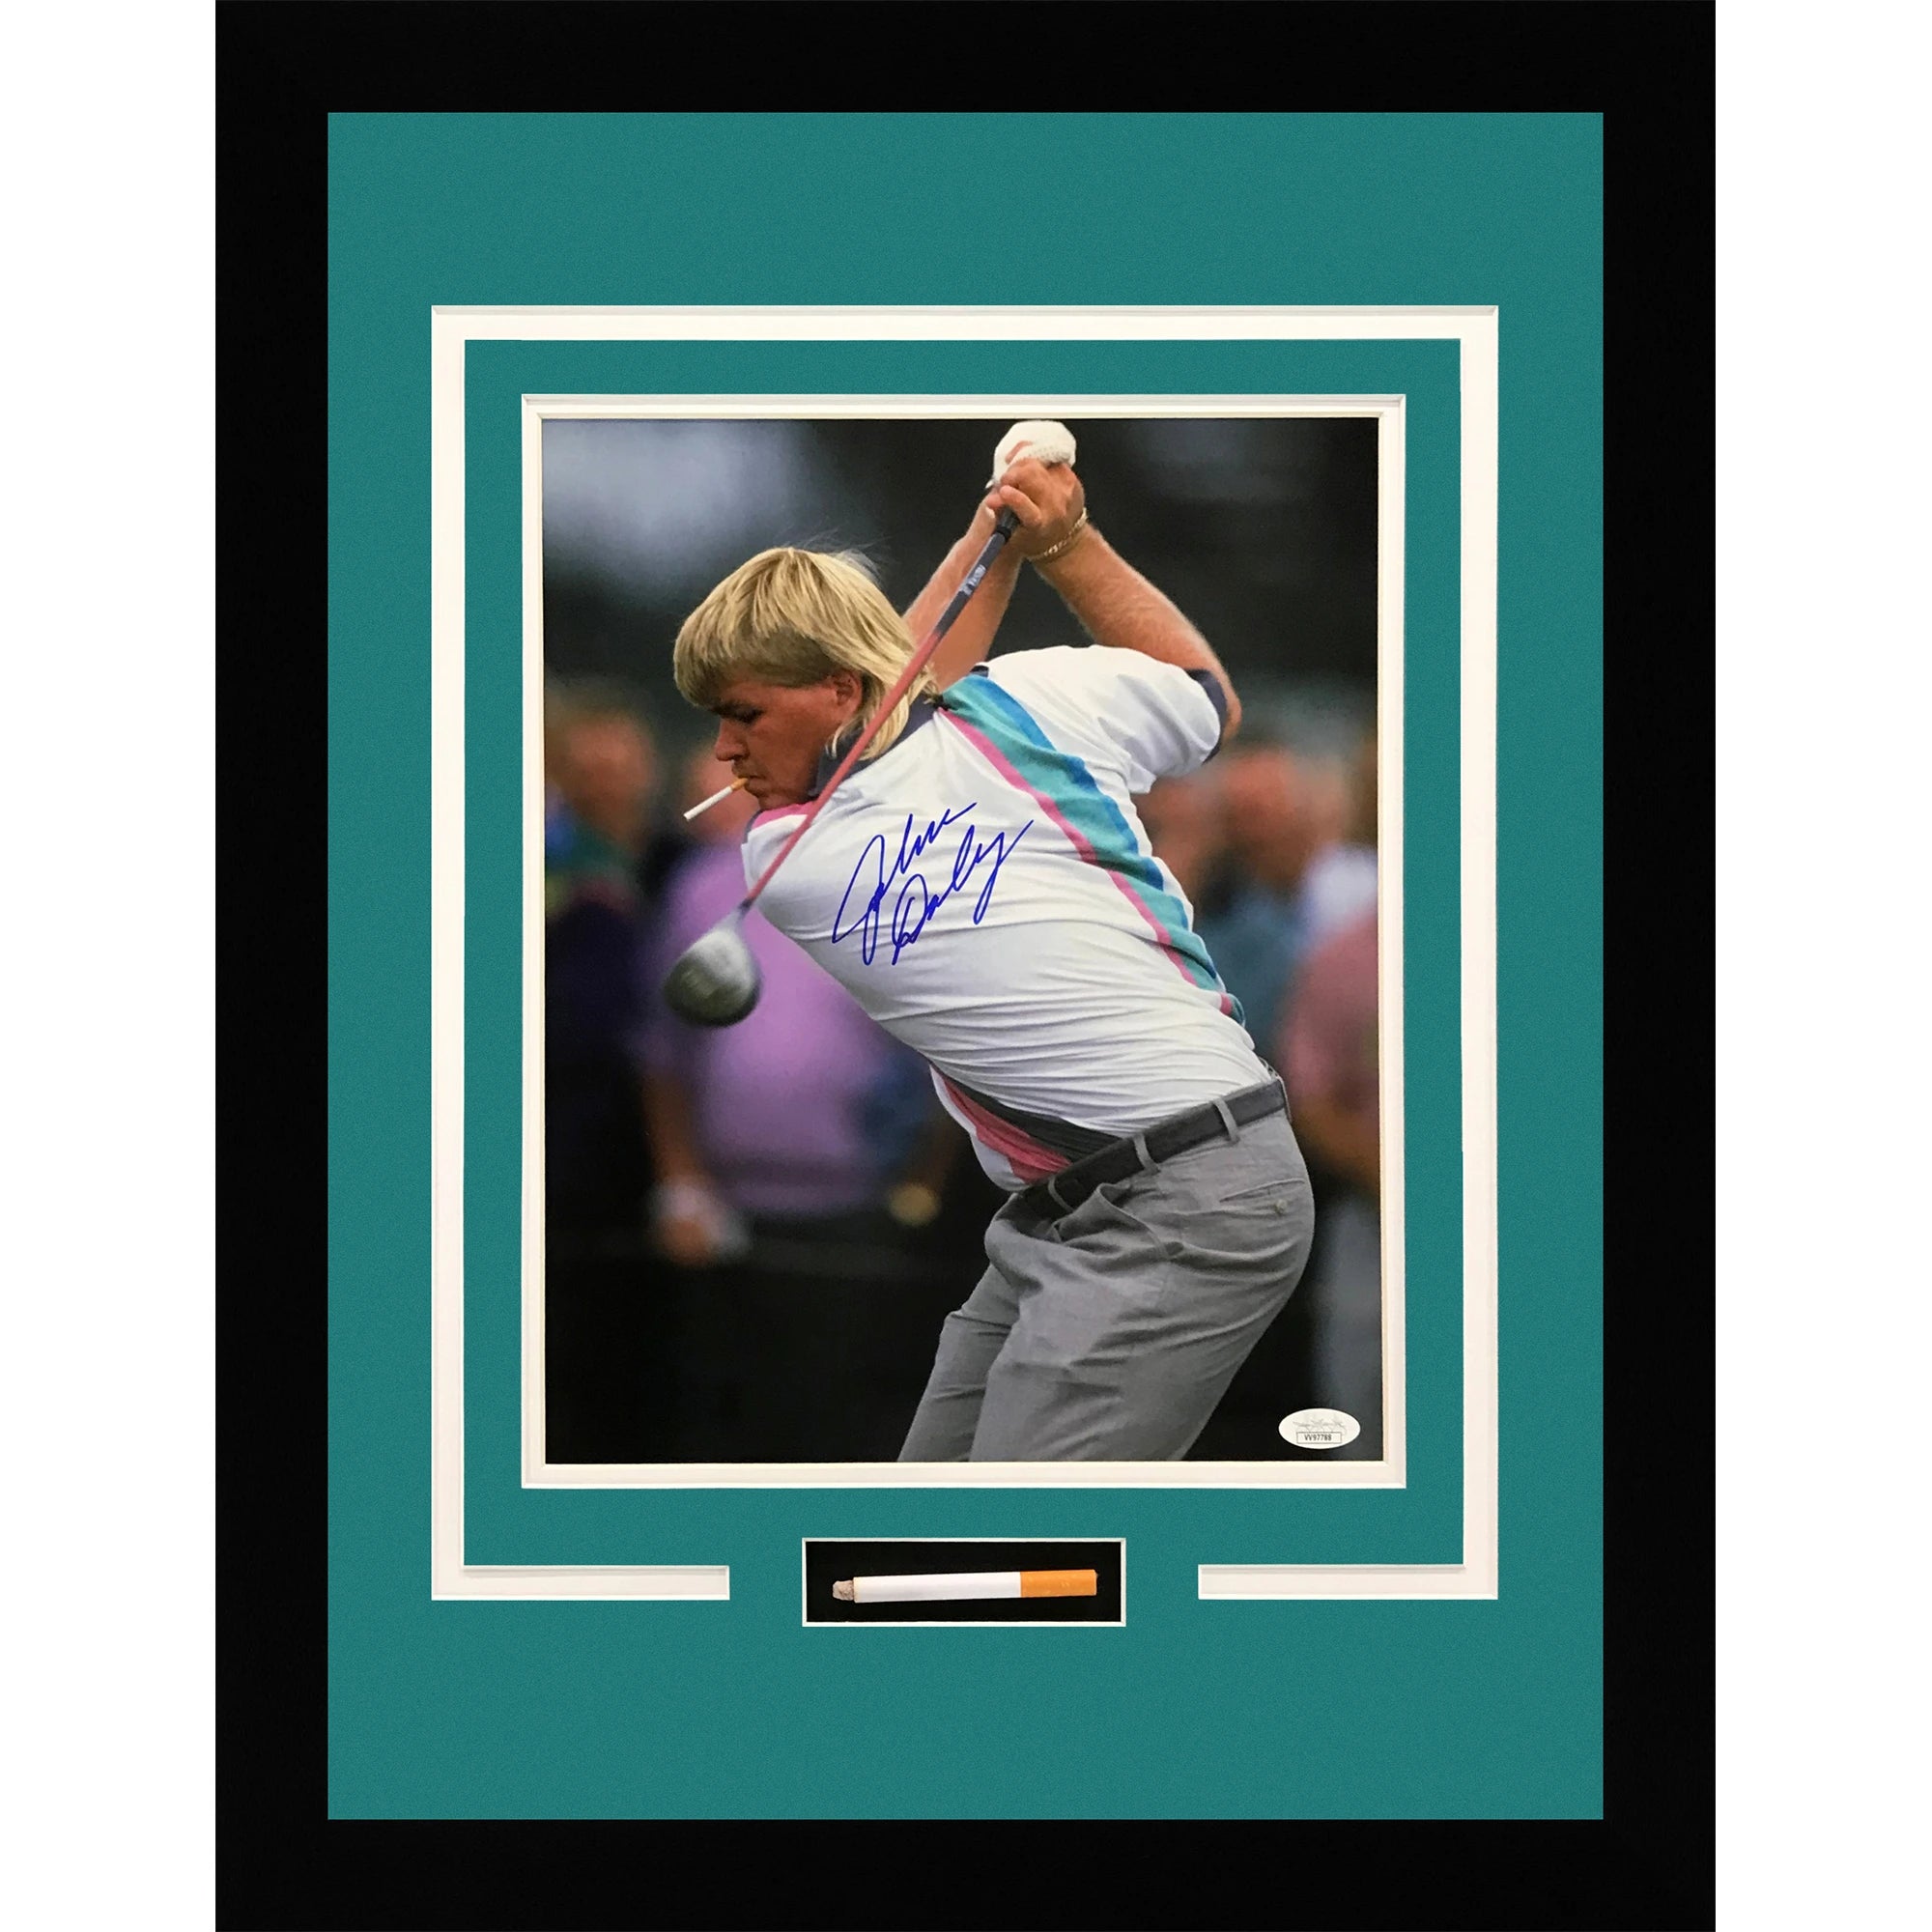 John Daly Autographed Golf (Smoking) 11×14 Photo Deluxe Framed Shadowbox with Cigarette - JSA